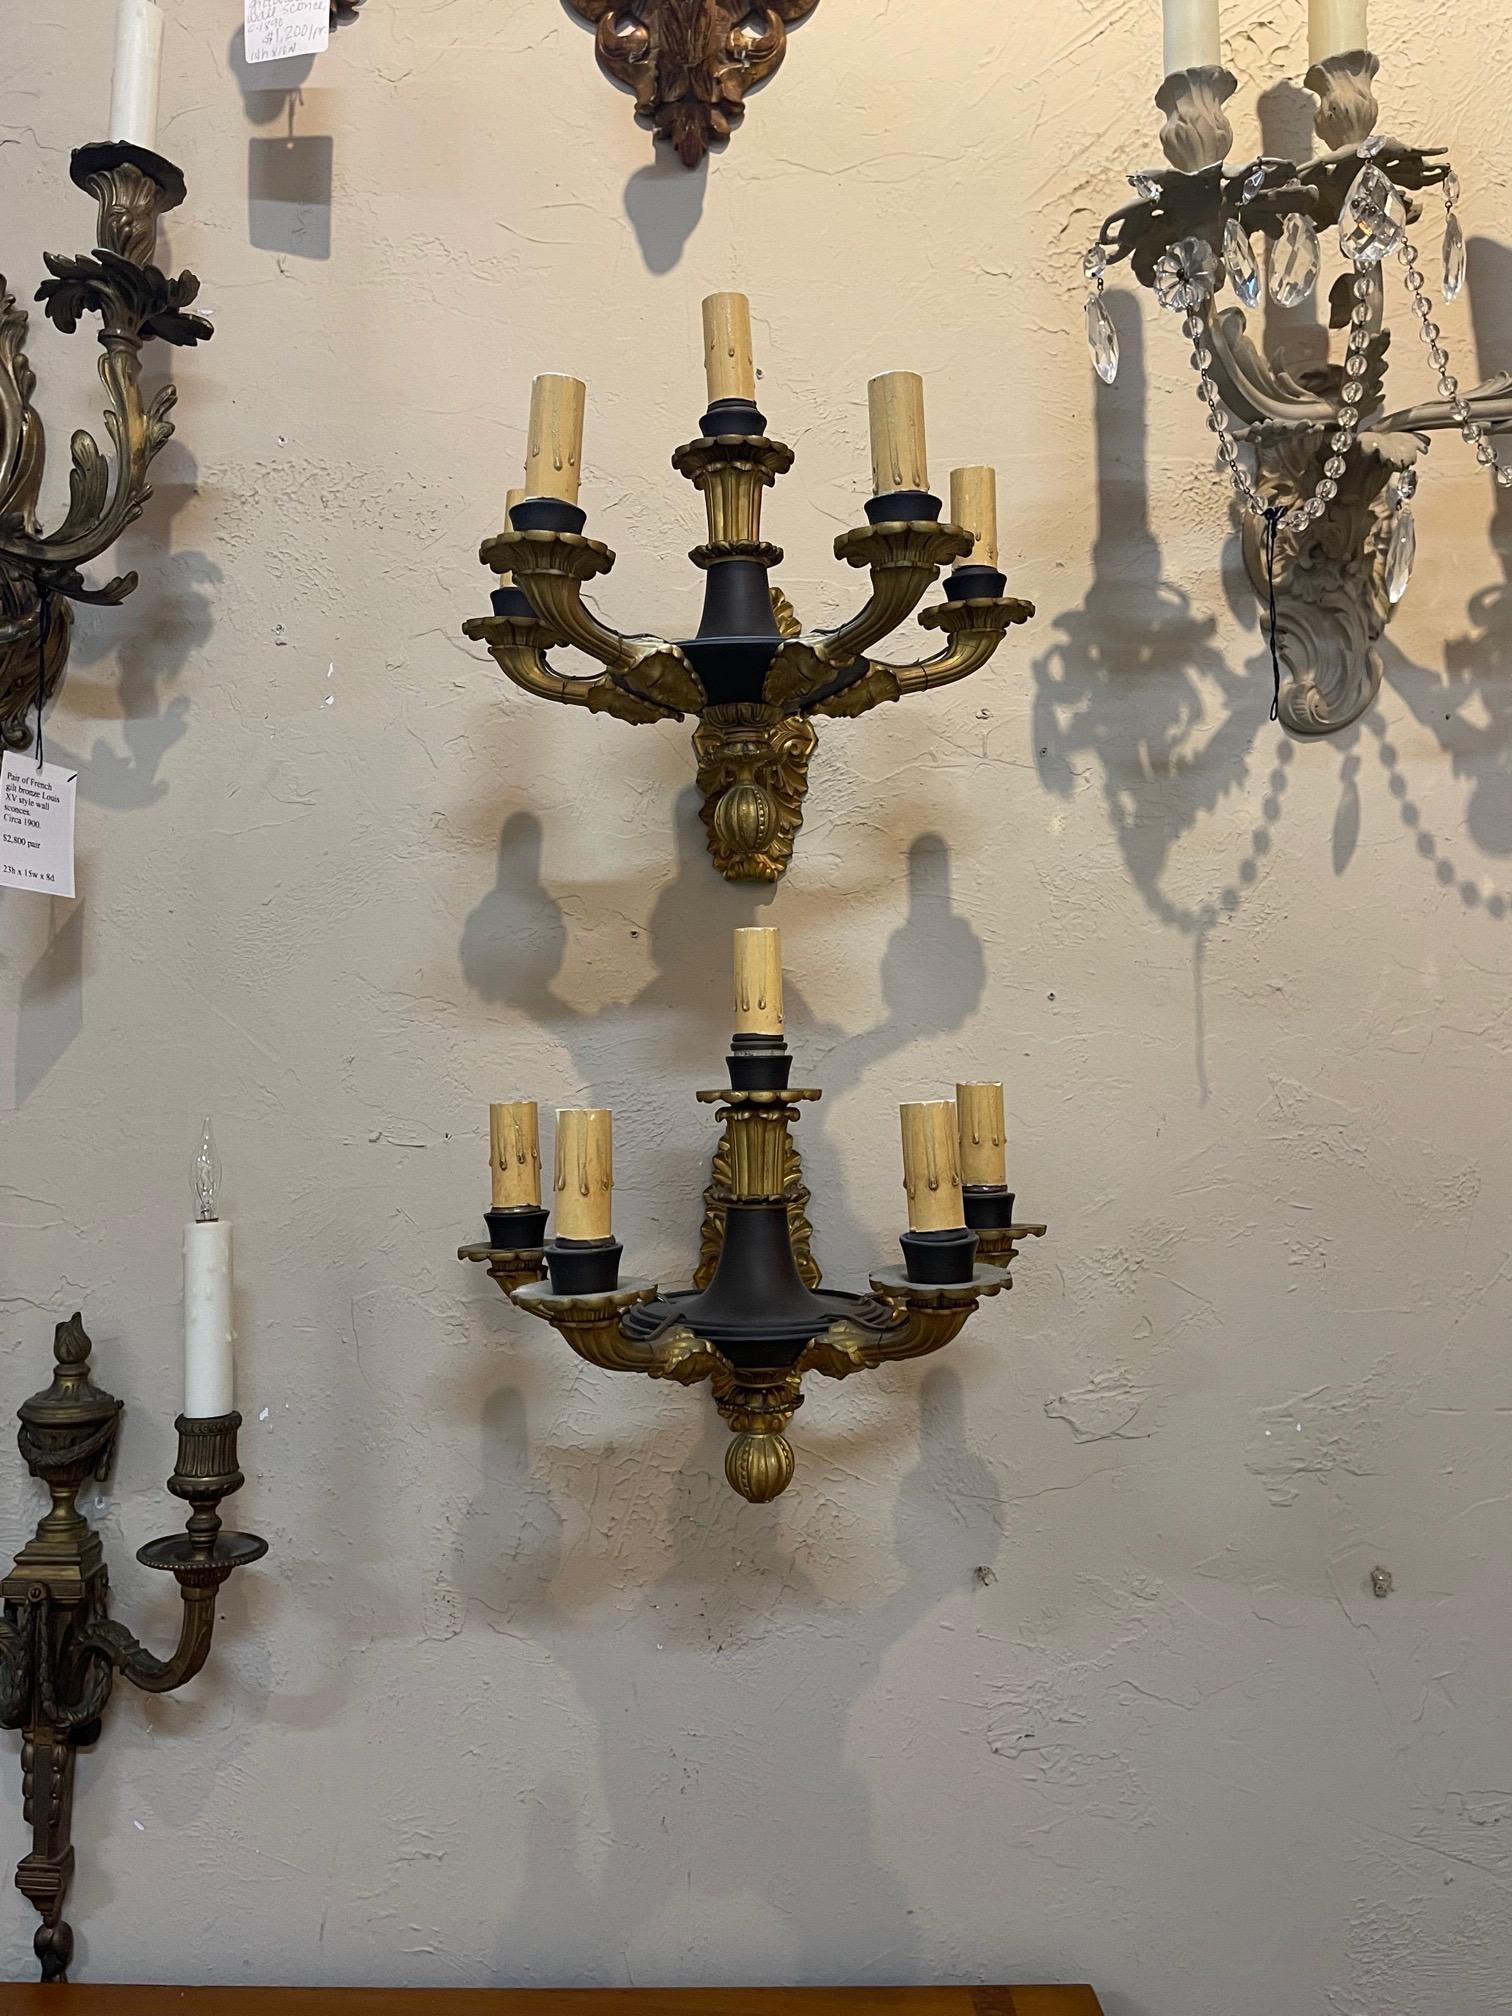 French Empire style pair of gilt bronze sconces with 5 lights. A classic pair in the colors of gold and black. Very nice!.